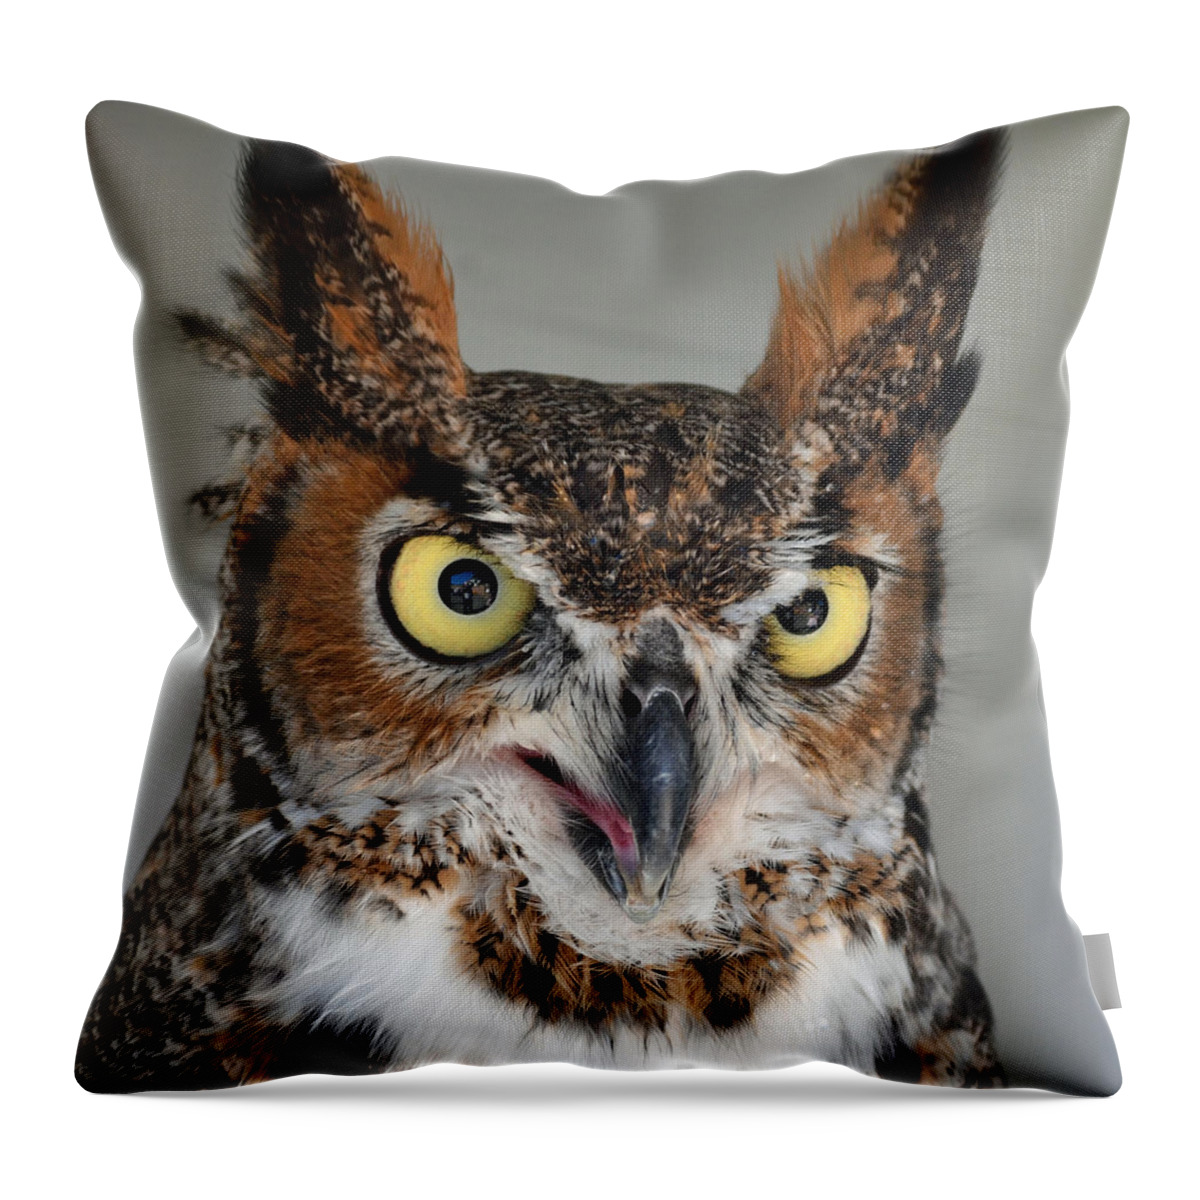 Long-eared Throw Pillow featuring the photograph Great Horned Owl #4 by Philip Ralley